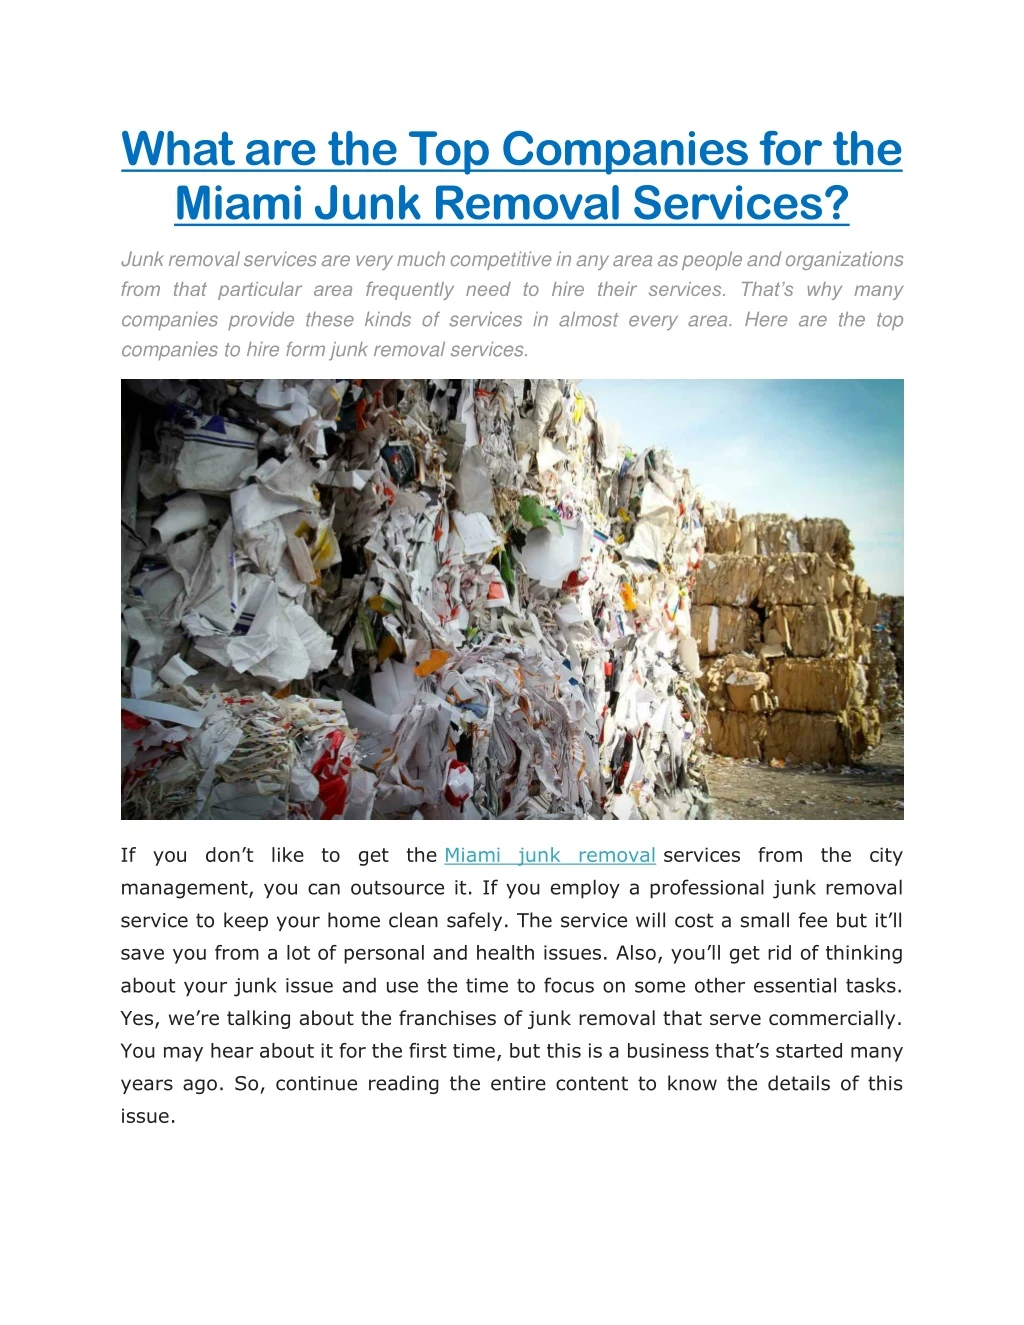 what are the top companies for the miami junk